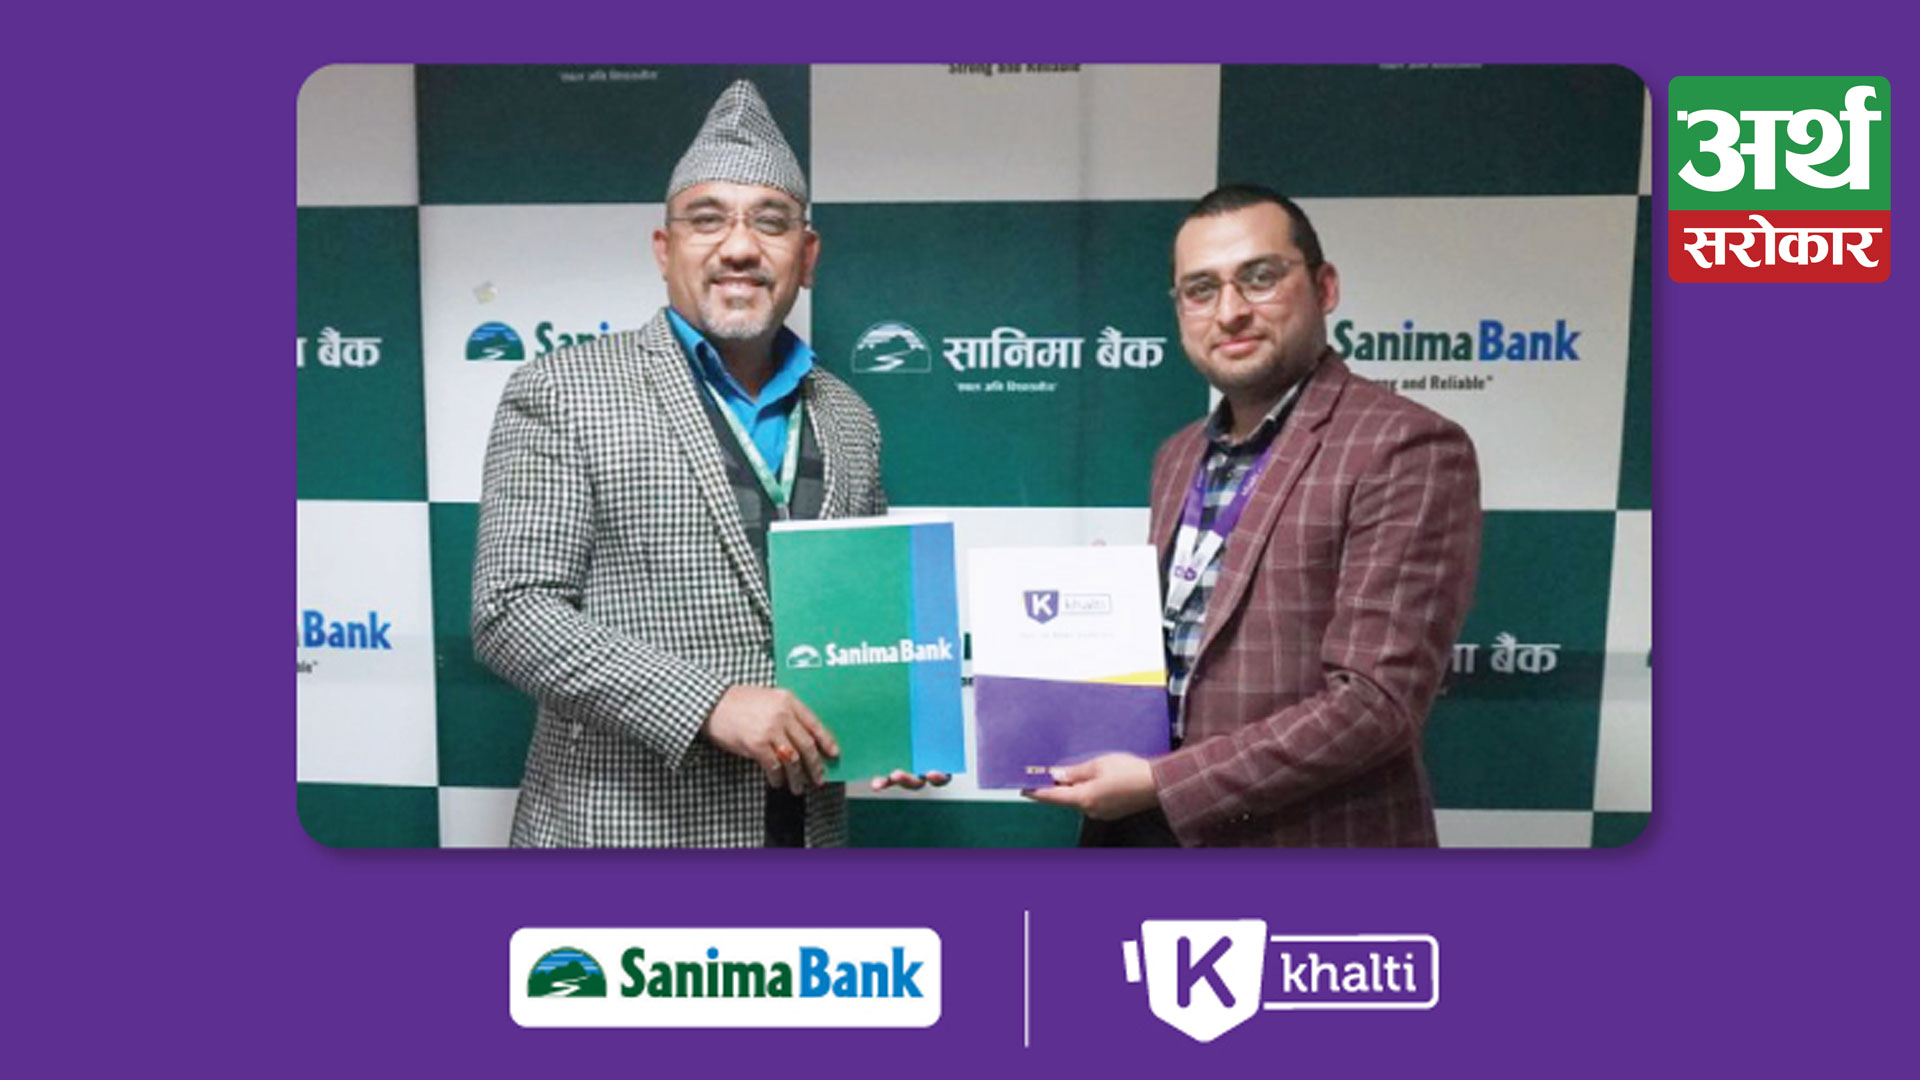 Sanima Bank Limited customers can now load funds on Khalti using Sanima Bank App